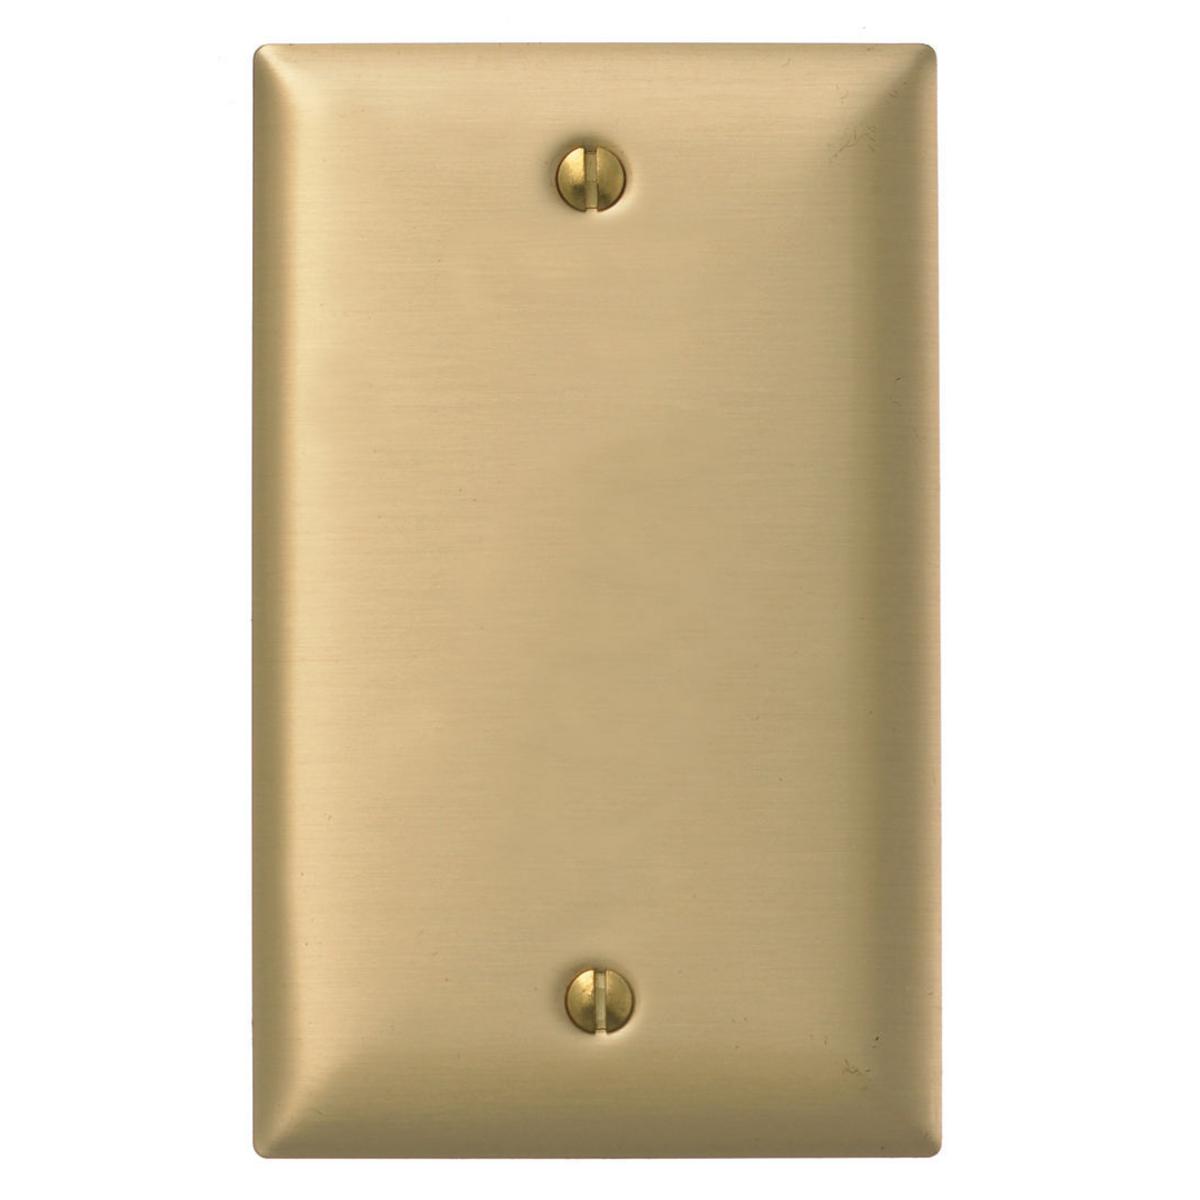 Hubbell SBP13 Wallplates and Boxes, Metallic Plates, 1- Gang, Blank, Standard Size, Brass Plated Steel  ; Non-magnetic and corrosion resistant ; Finish is lacquer coated to inhibit oxidation ; Protective plastic film helps to prevent scratches and damage ; Protective f